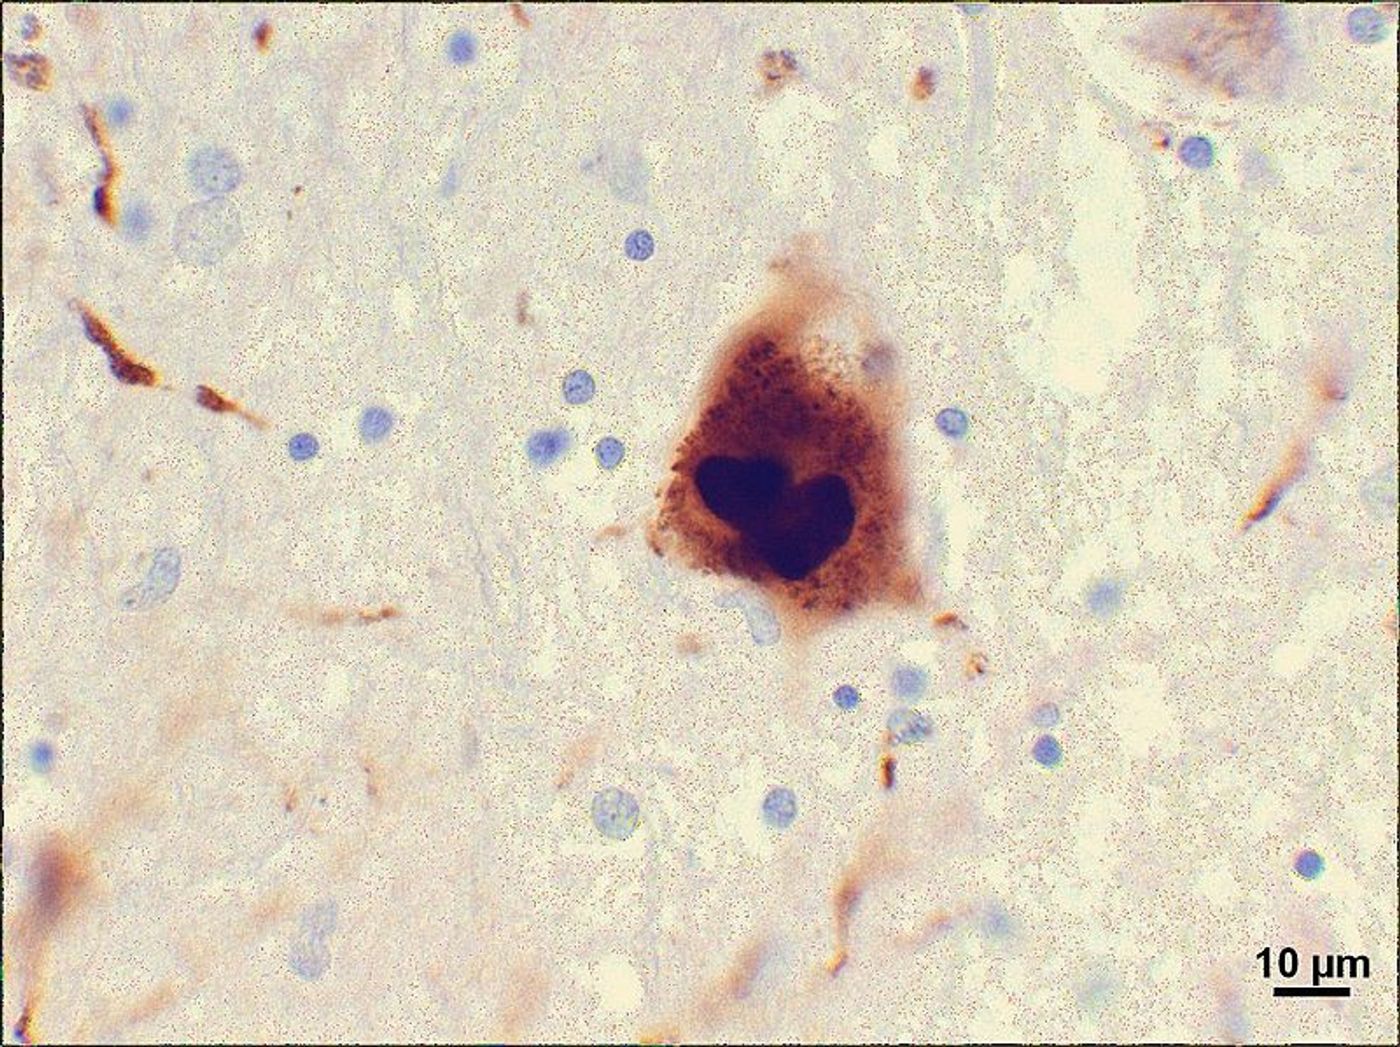 Photomicrograph of a region of substantia nigra in a Parkinson's patient showing Lewy bodies and Lewy neurites. Credit: Suraj Rajan